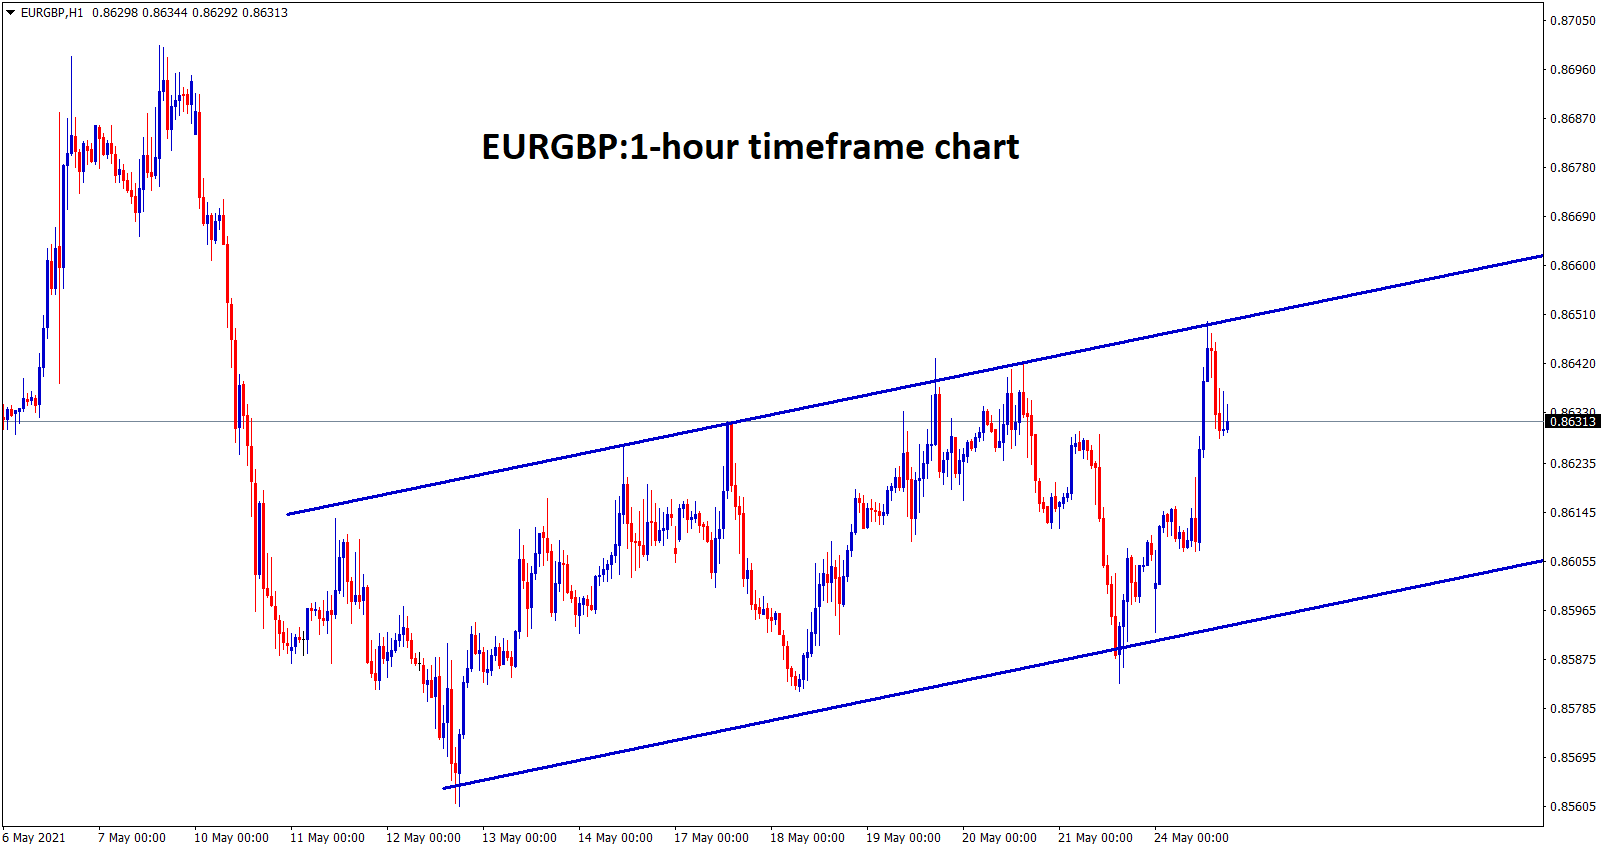 EURGBP is moving in an Ascending channel in the 1 hour timeframe